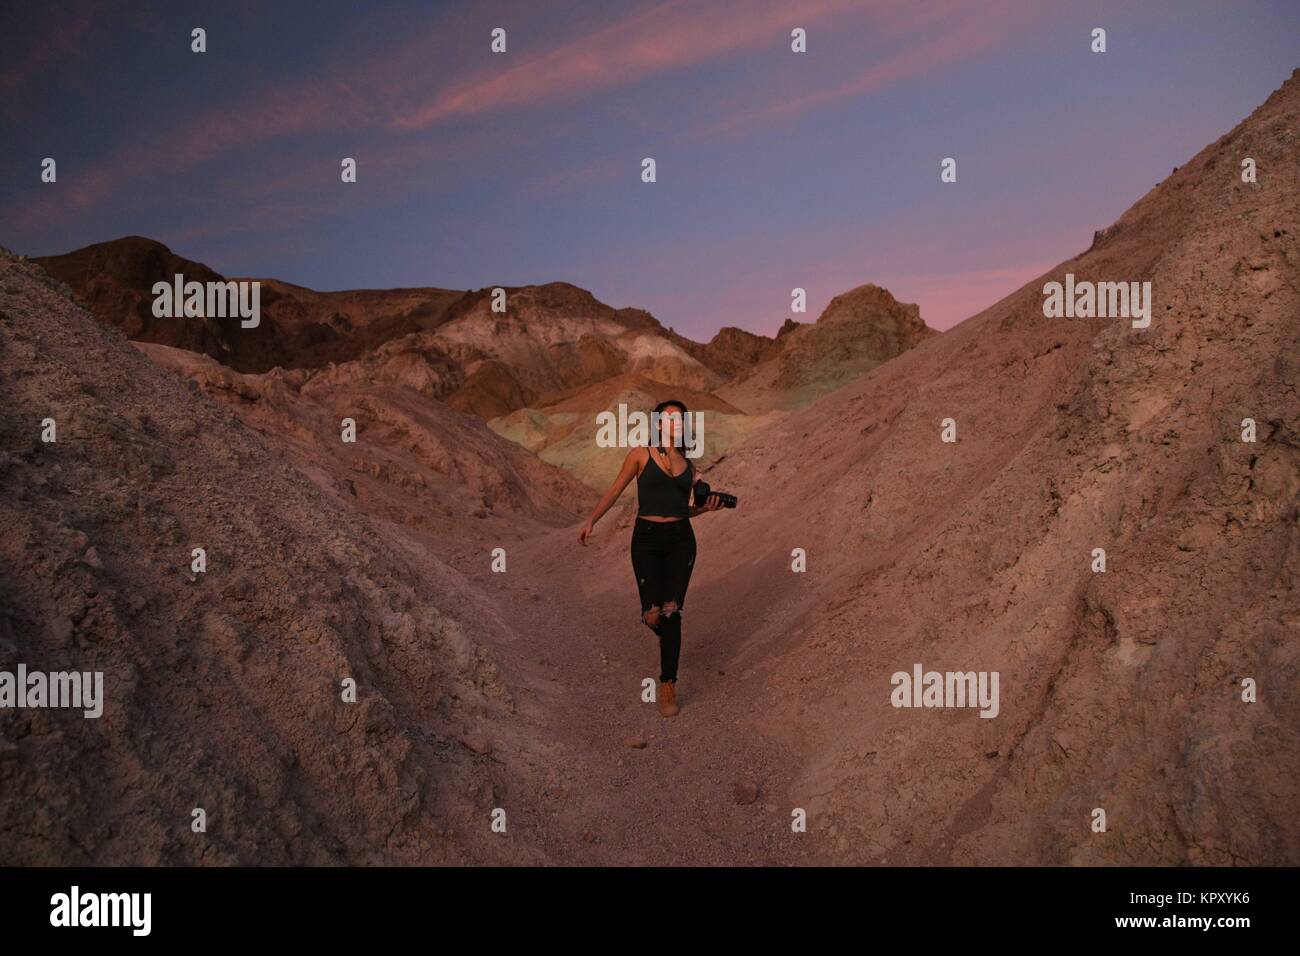 Death Valley National Park, California, USA. 19th Nov, 2017. KATIE GRAVES walking through Artist's Palette as the desert sunset painted the ground pink. Credit: Sarah Murray/Stumbleweeds/ZUMA Wire/Alamy Live News Stock Photo